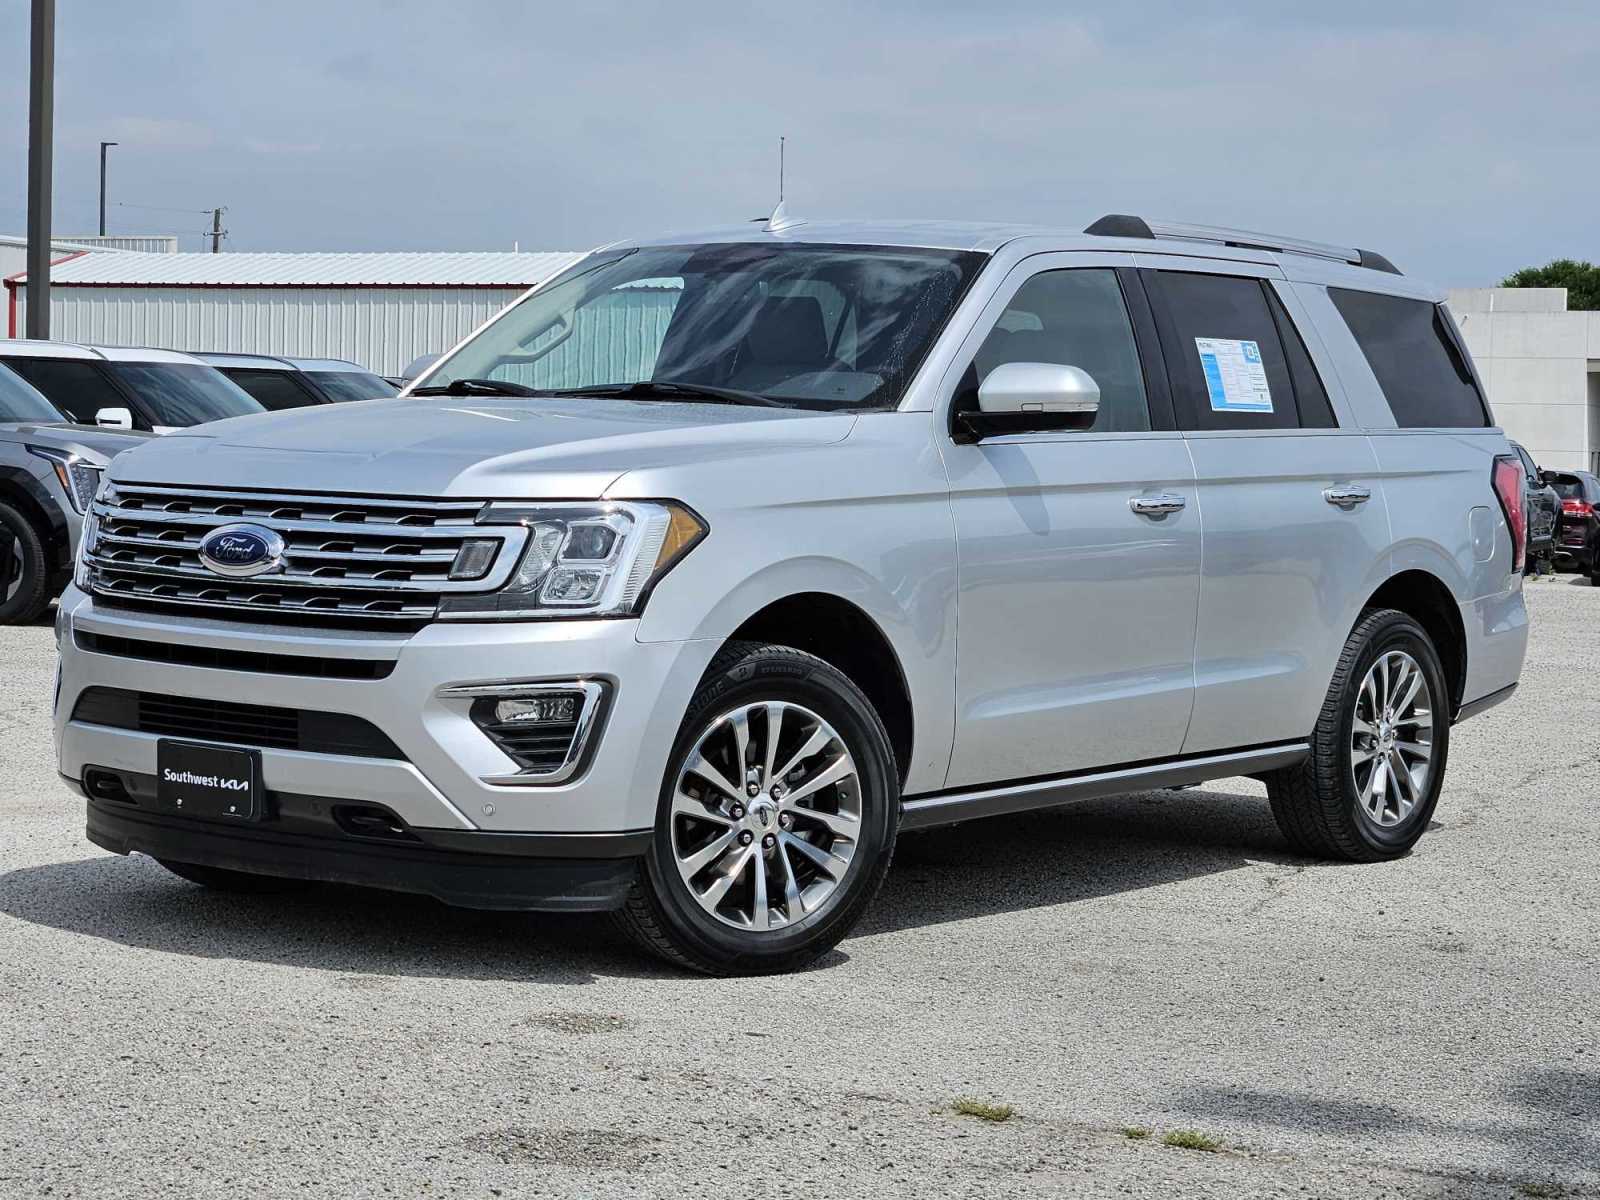 2018 Ford Expedition Limited Hero Image